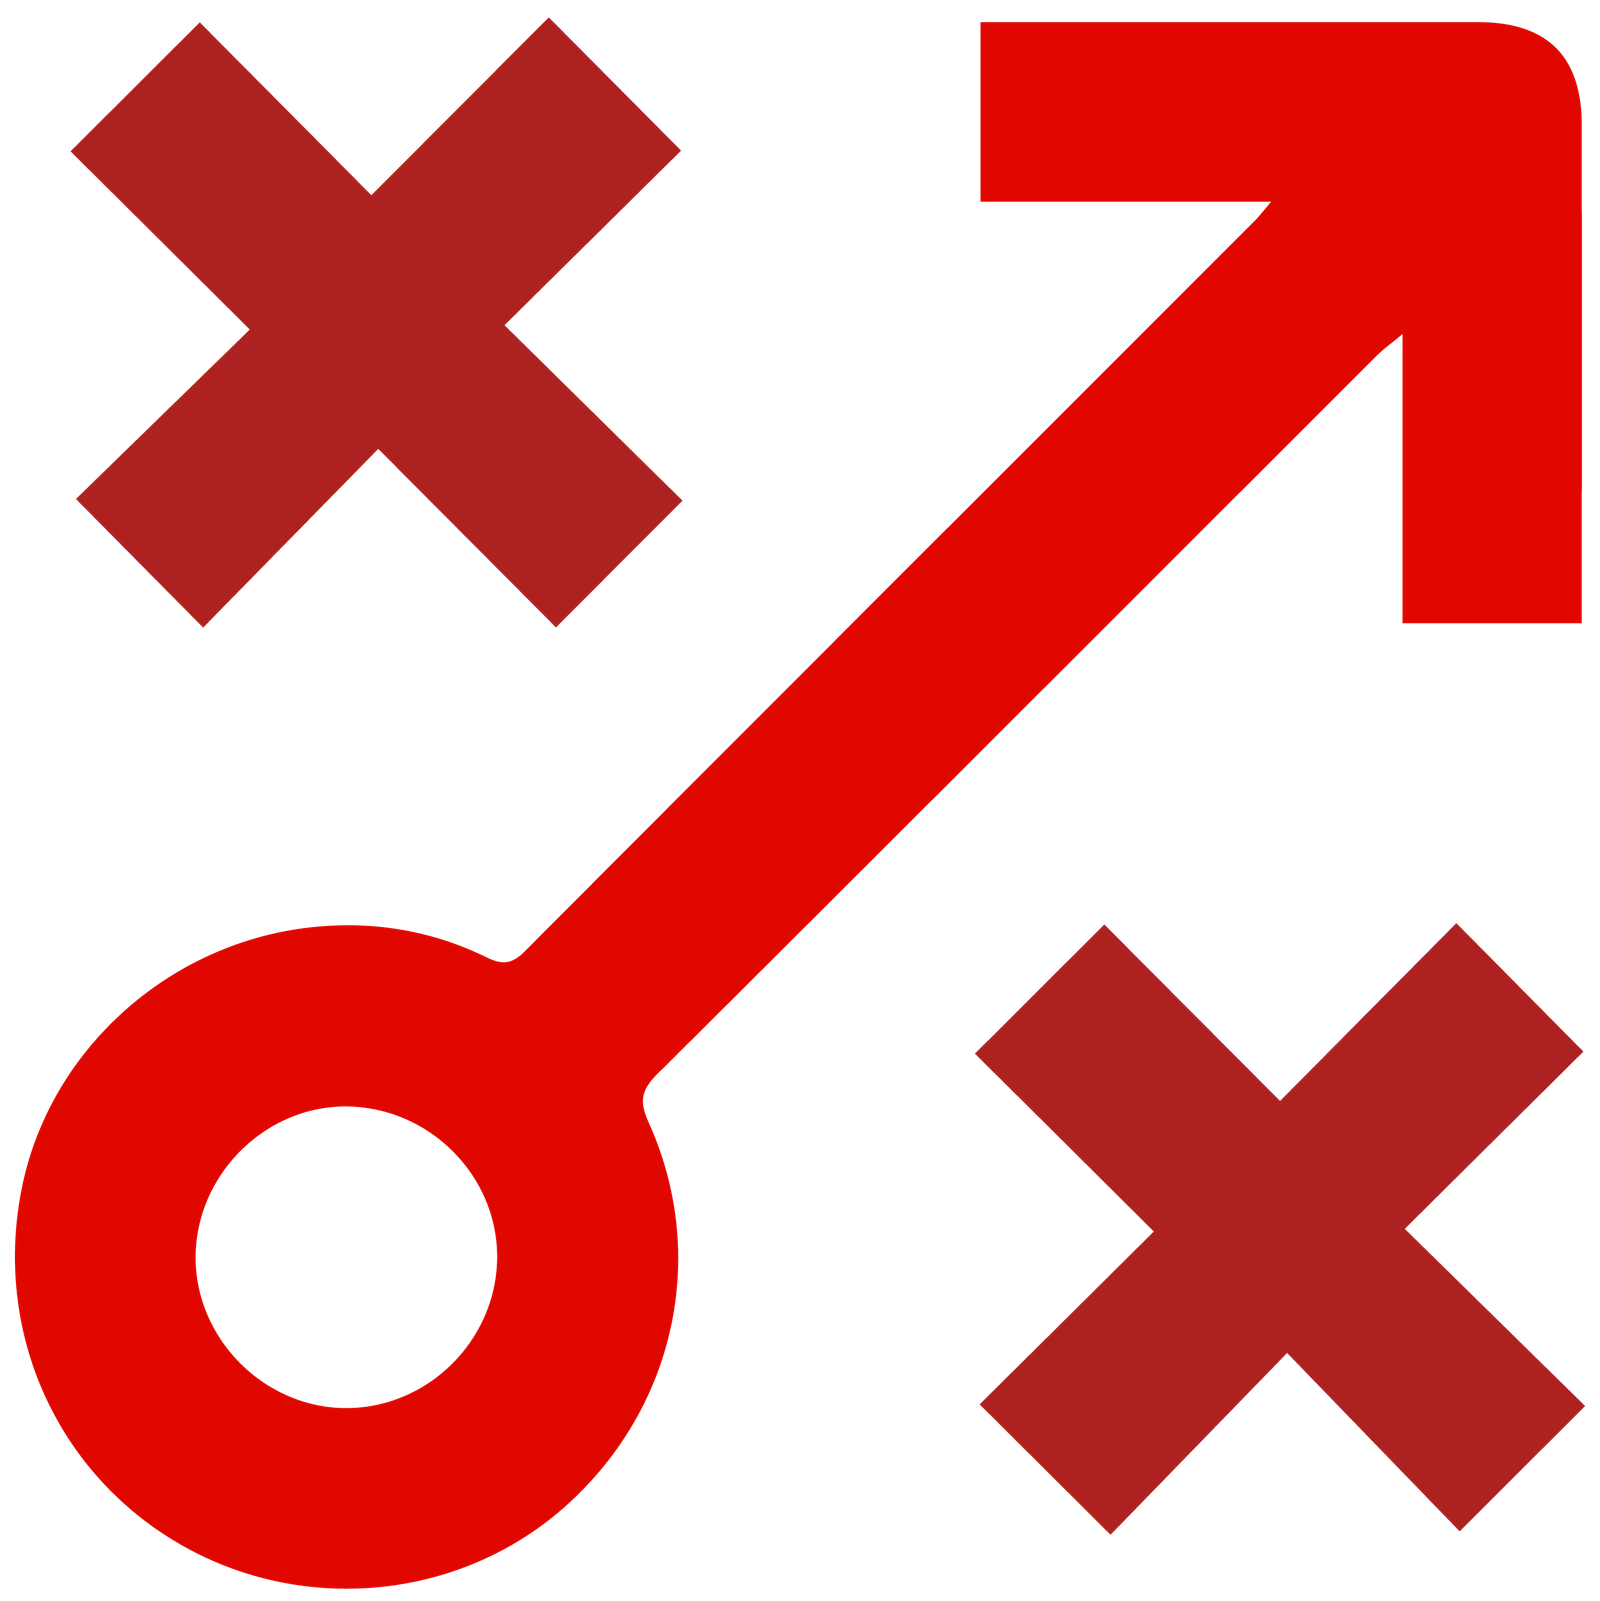 Icon motif with diagonal arrow surrounded by two crosses